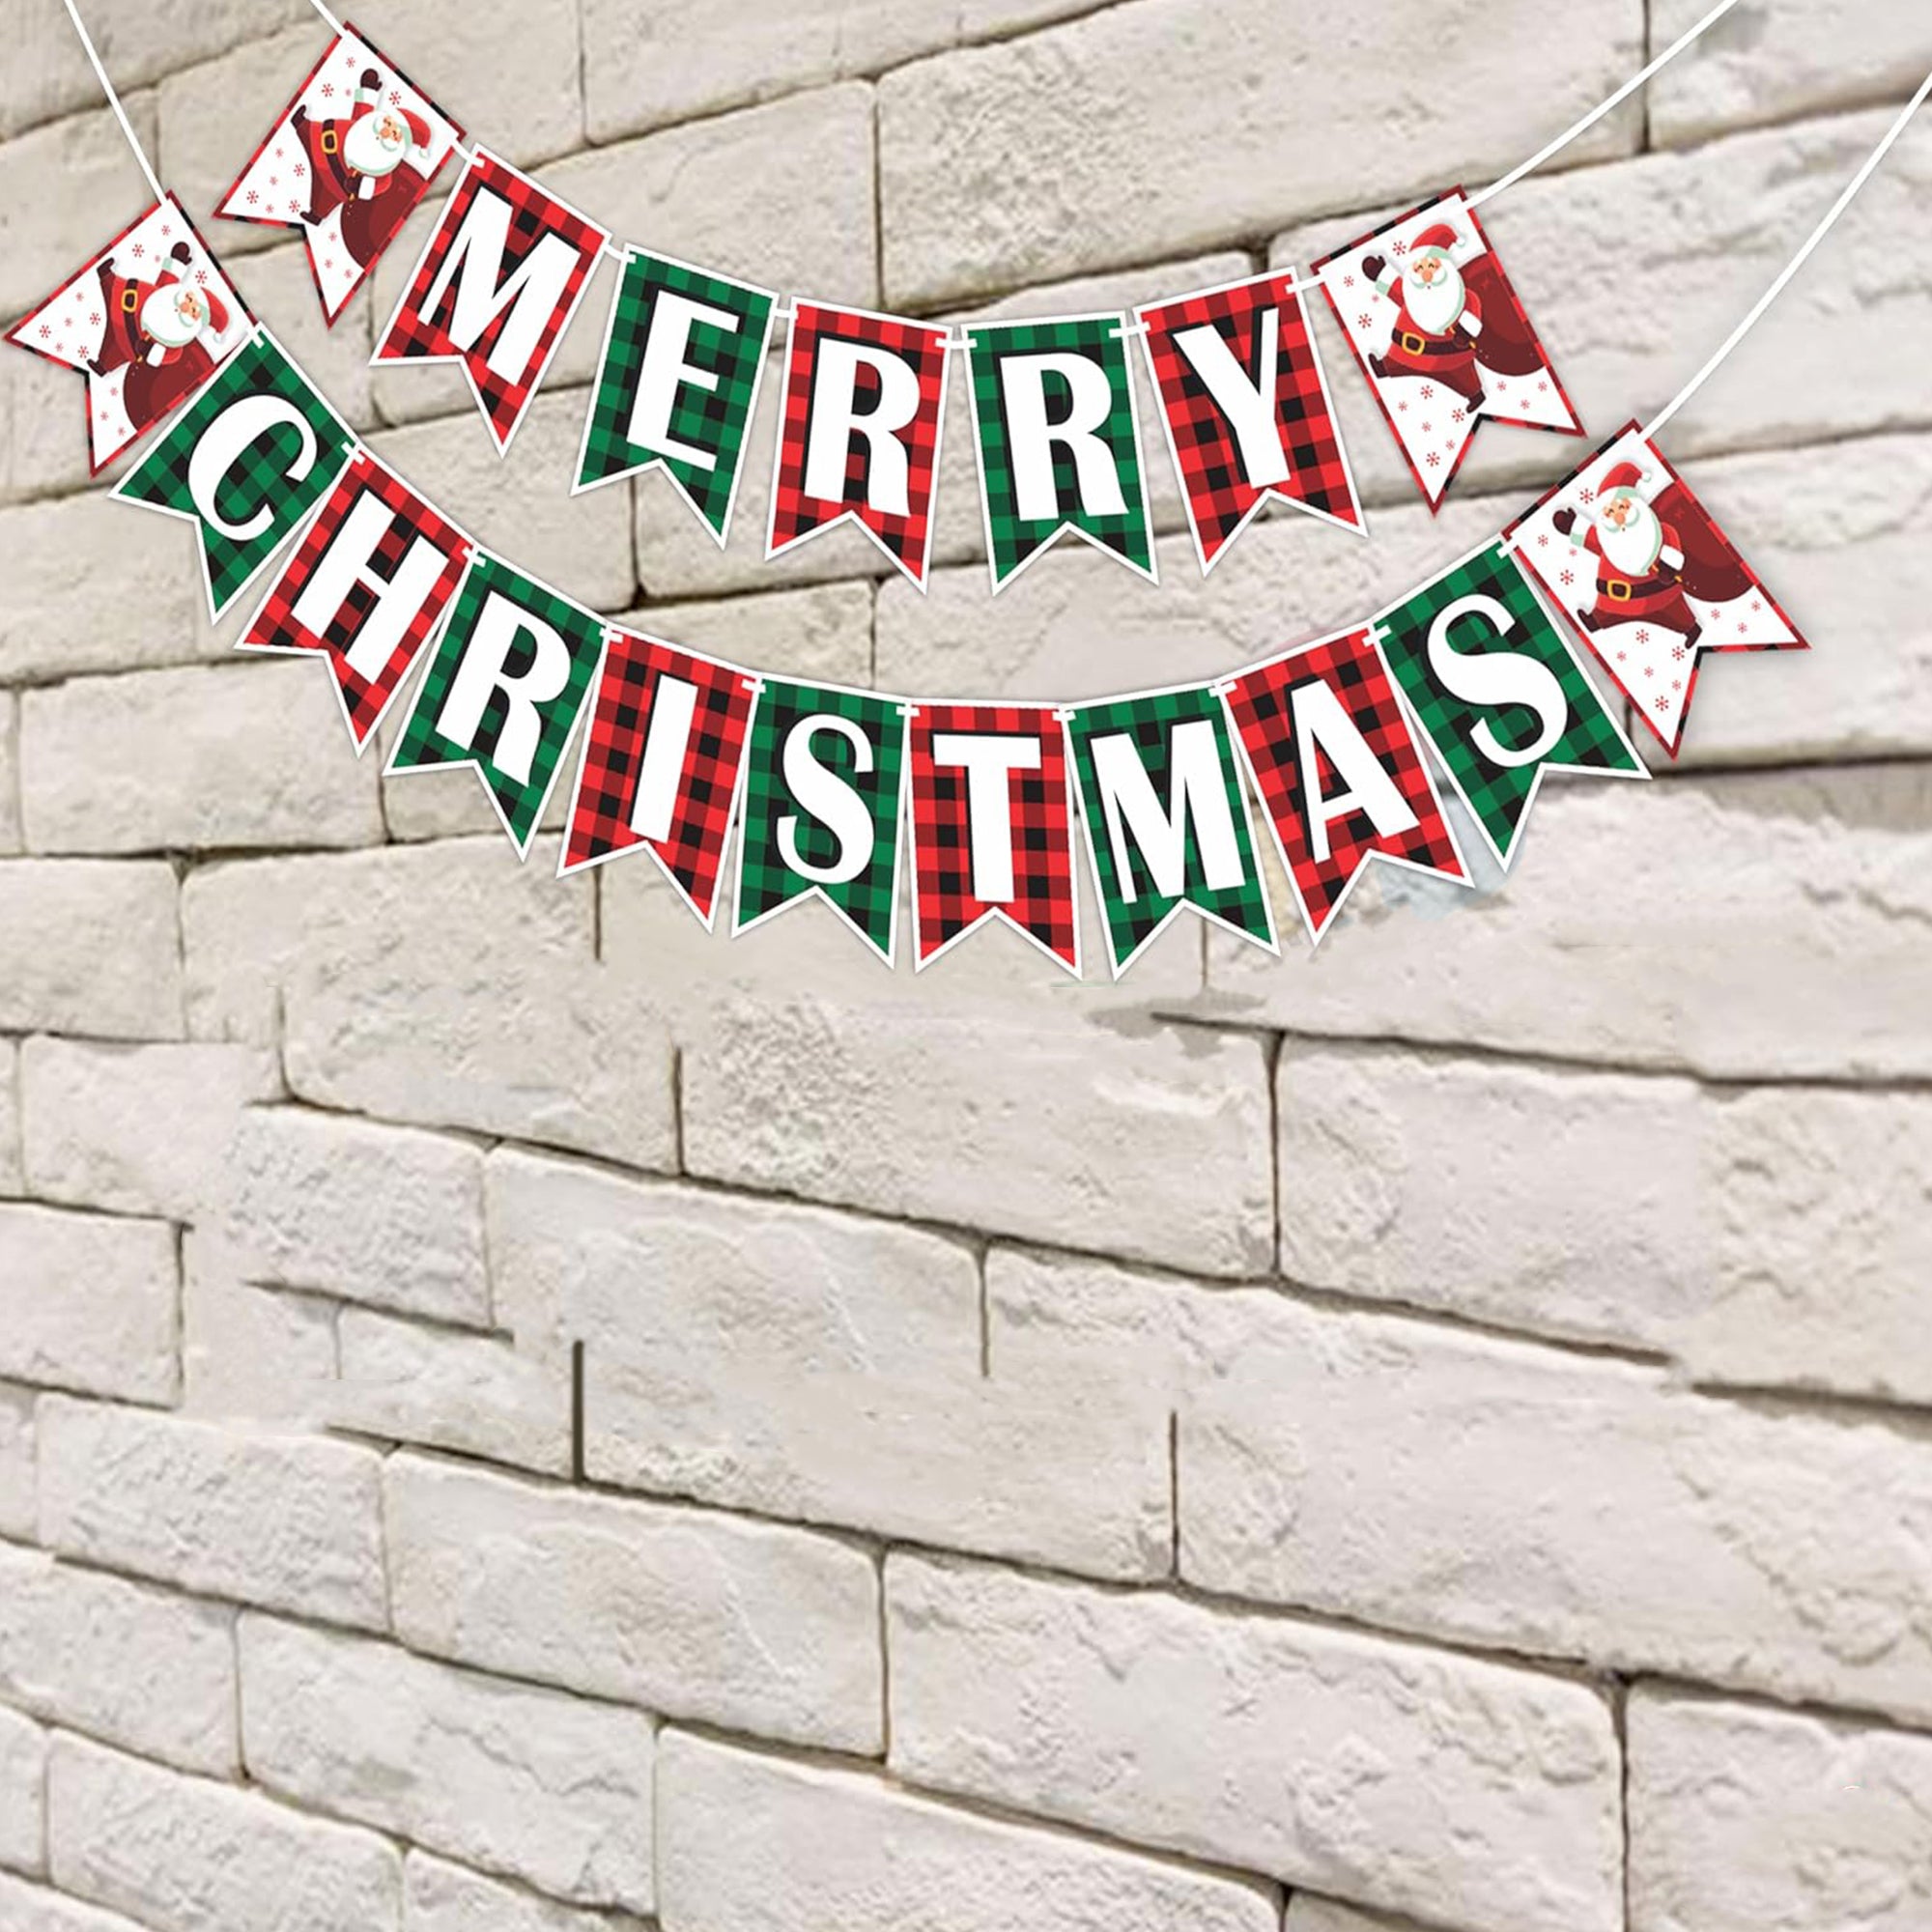 eCraftIndia Merry Christmas Santa Bunting Banner, Christmas Decorations Item for Home, Office (Red, Green, White) 3